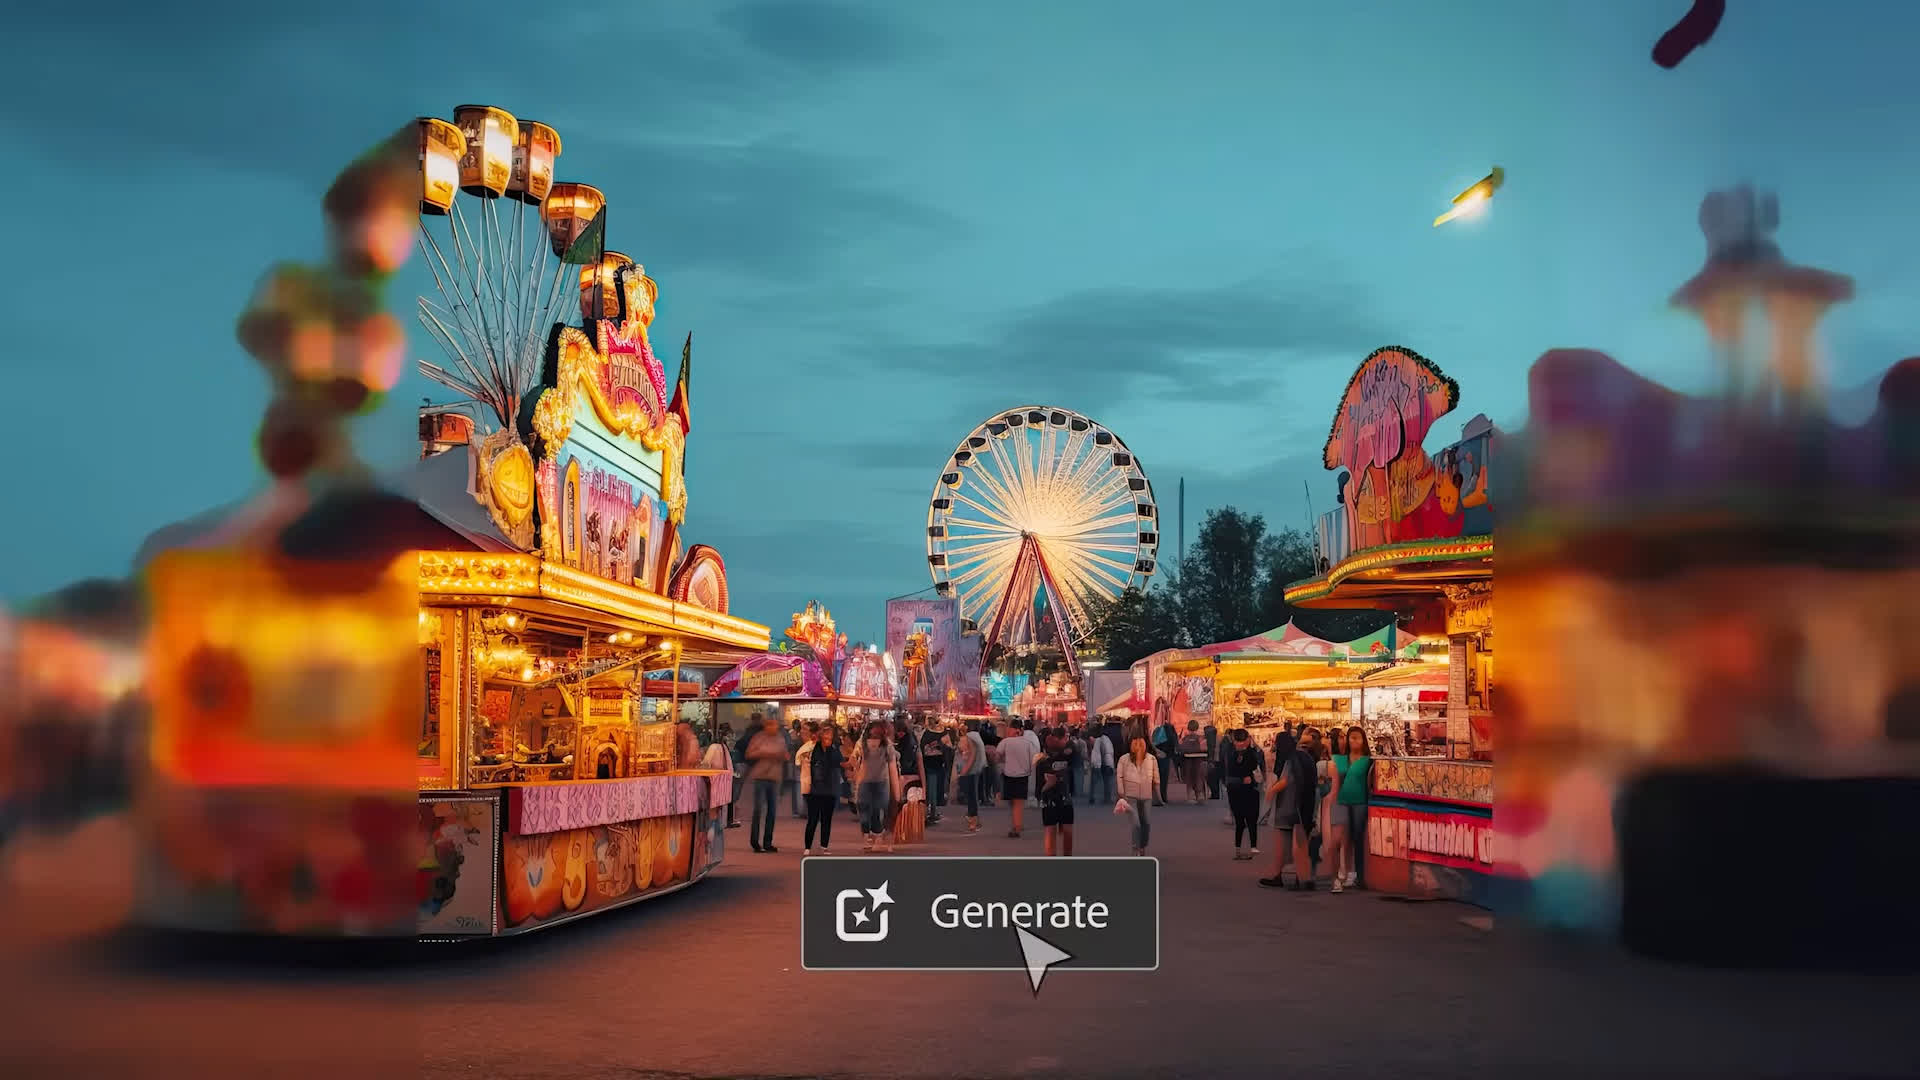 Adobe teases next-gen AI tools for image editing and object manipulation in a few clicks